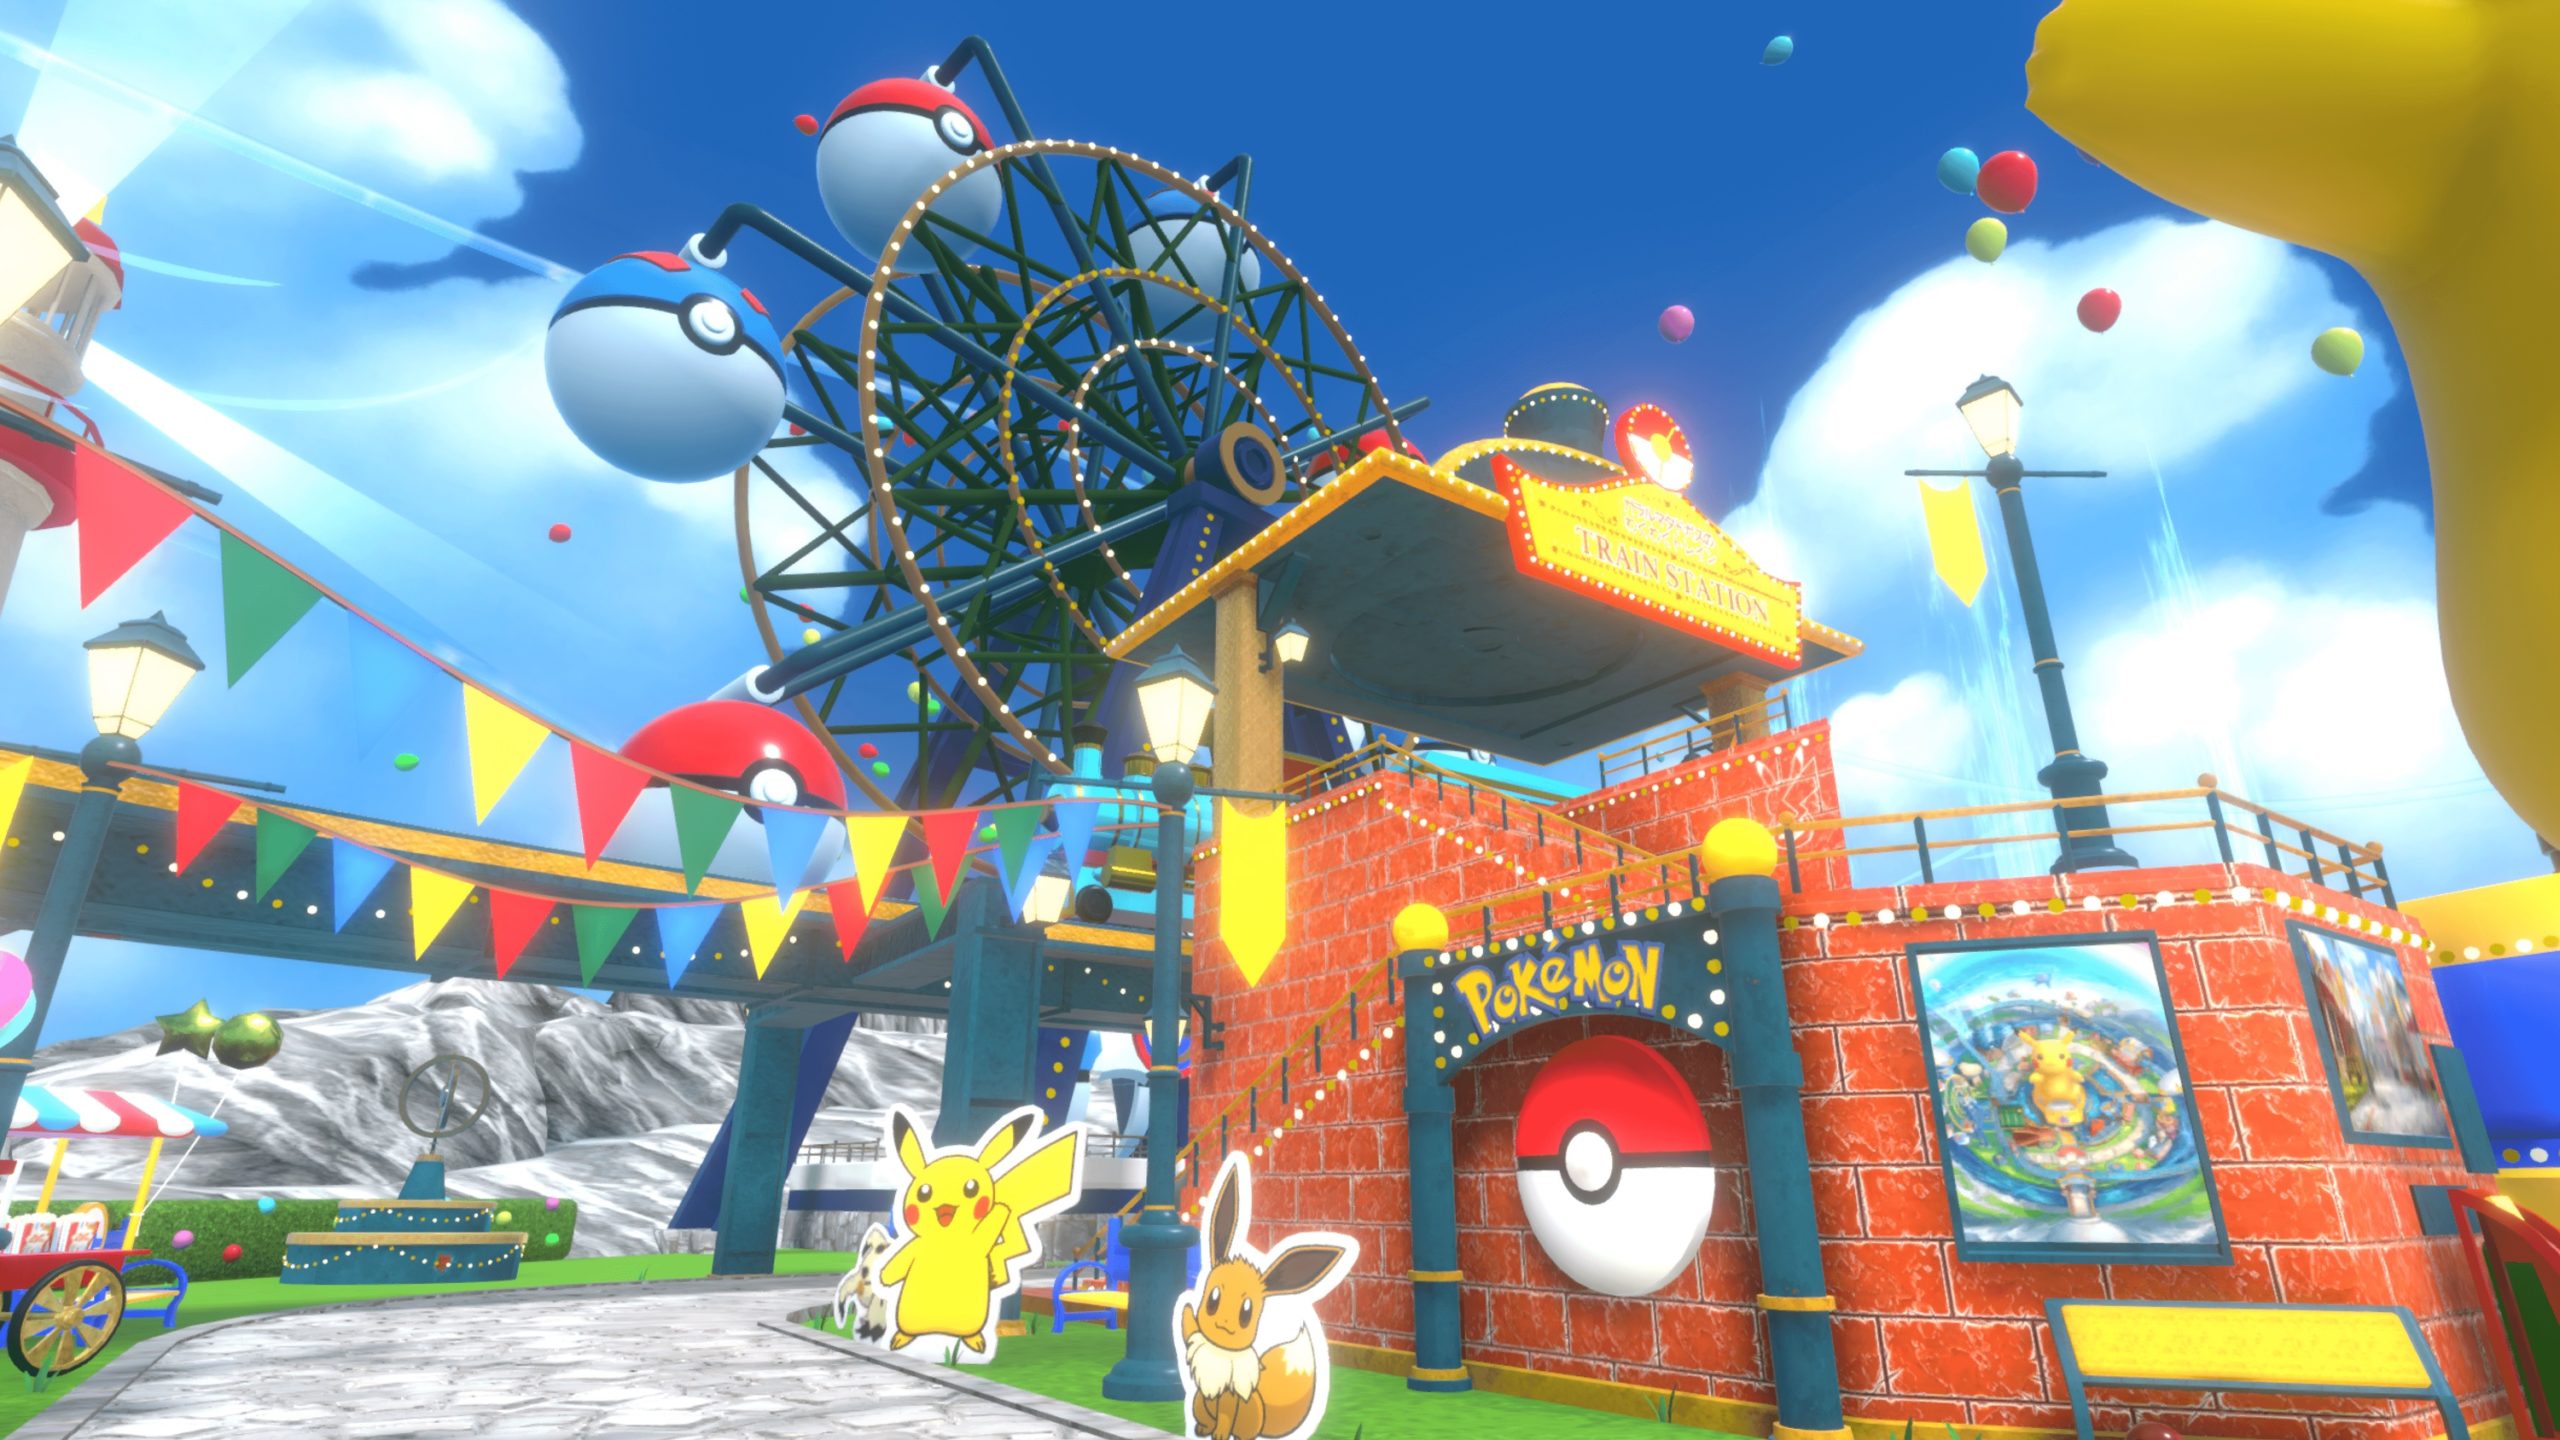 Here's a first look at the Pokémon Virtual Fest theme park Dot Esports